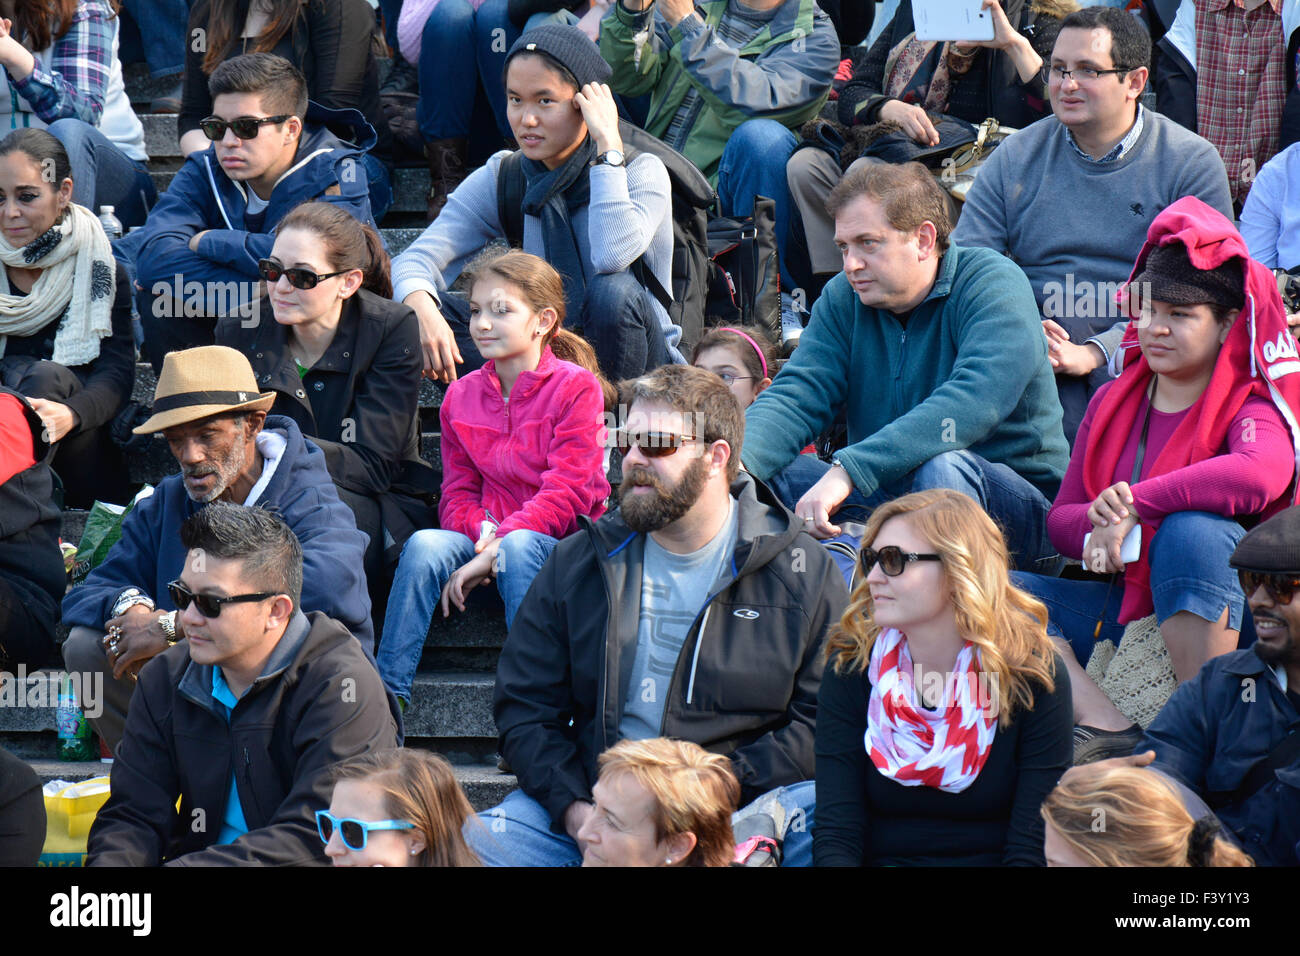 Multitude of diverse people in the USA sitting on bleachers reacting and watching an event Stock Photo